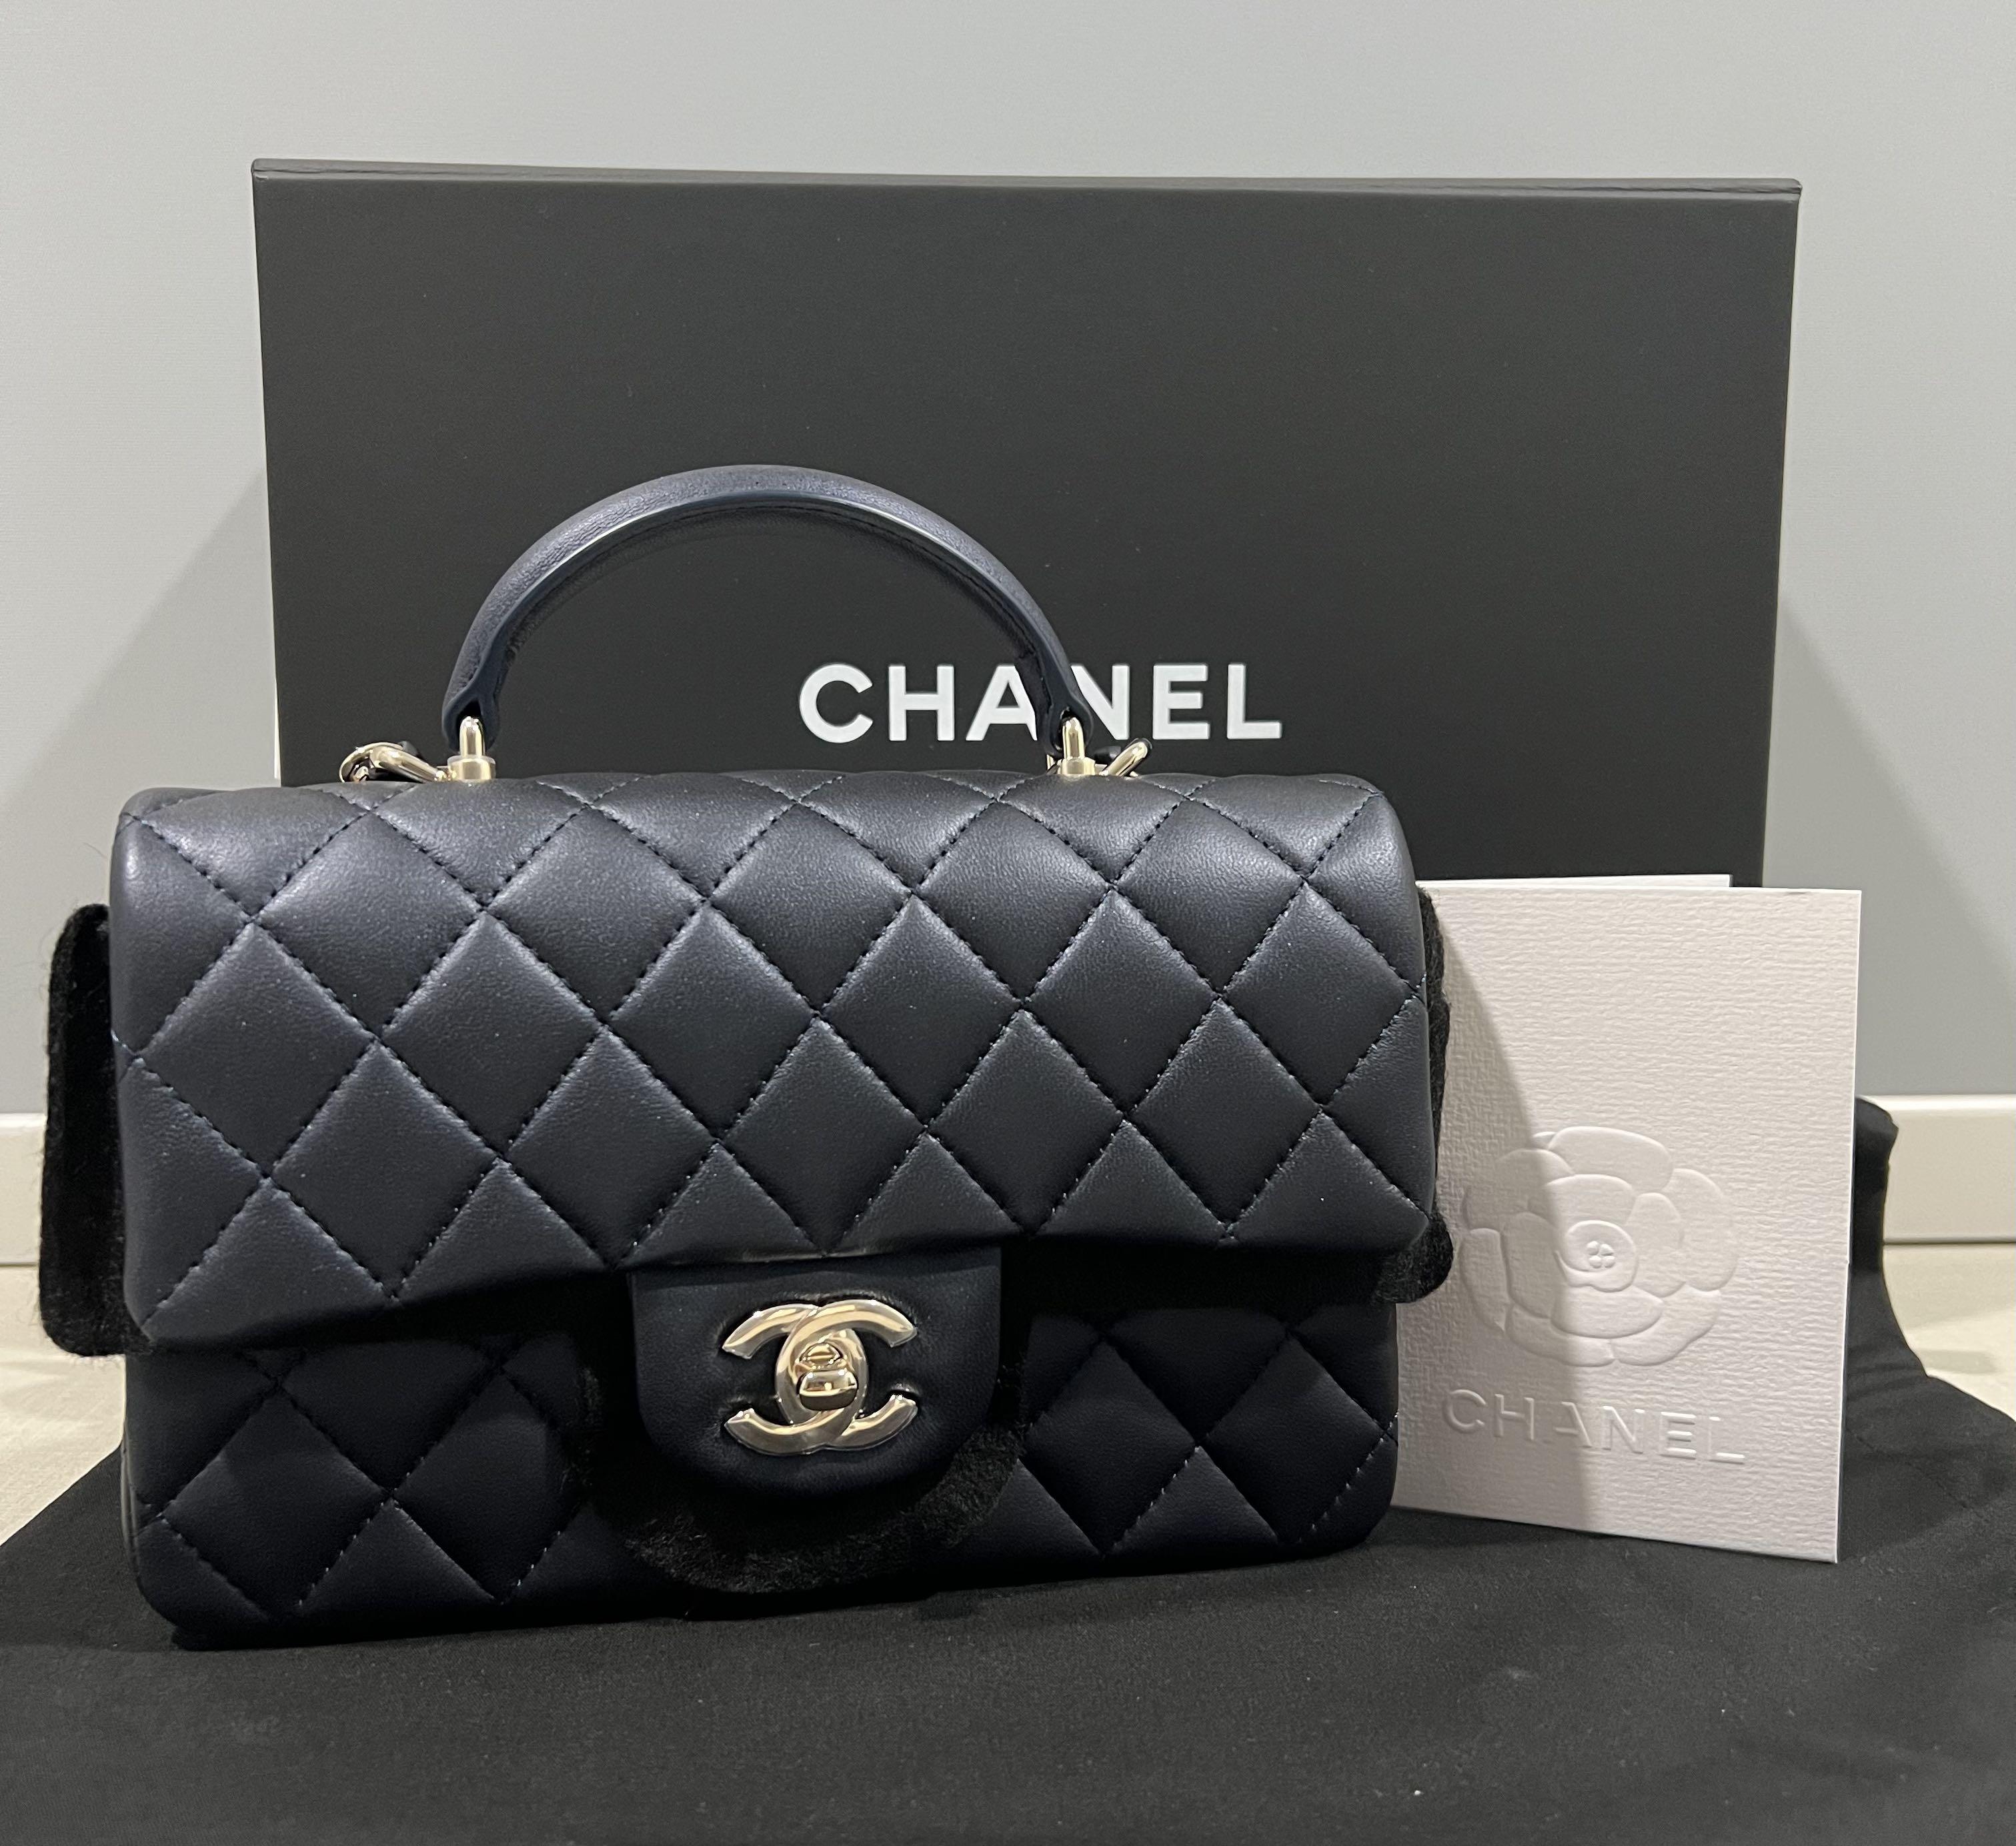 Chanel Mini Flap Bag with Top Handle in Dark Blue